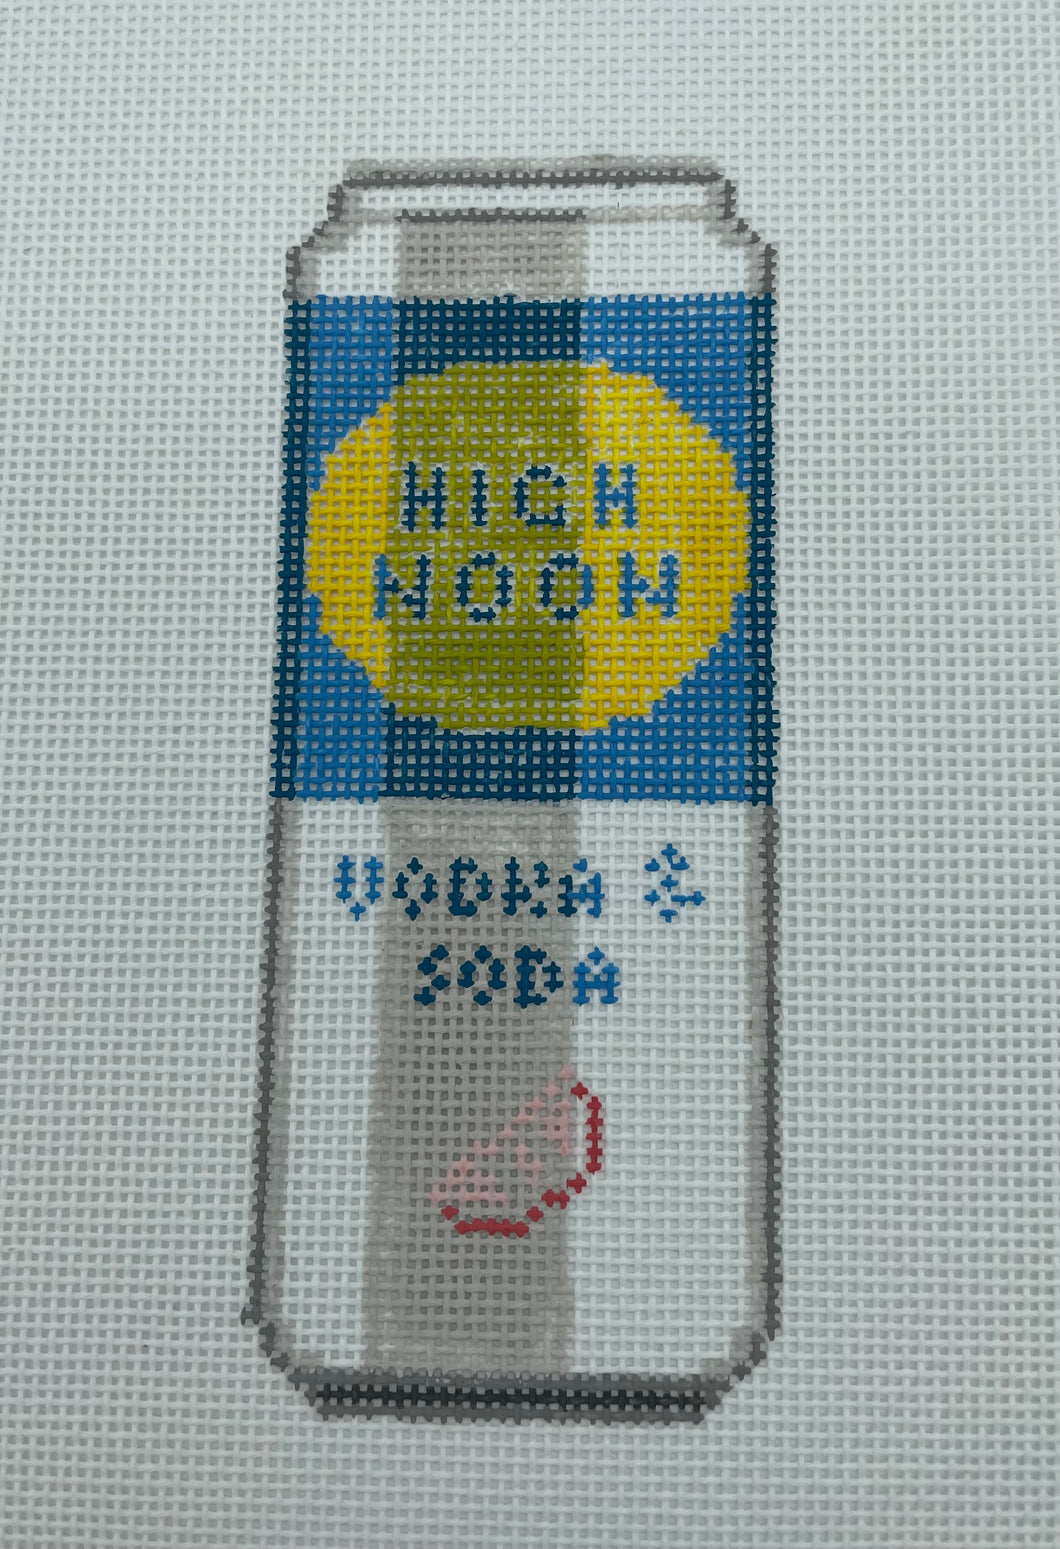 High Noon Needlepoint Ornament